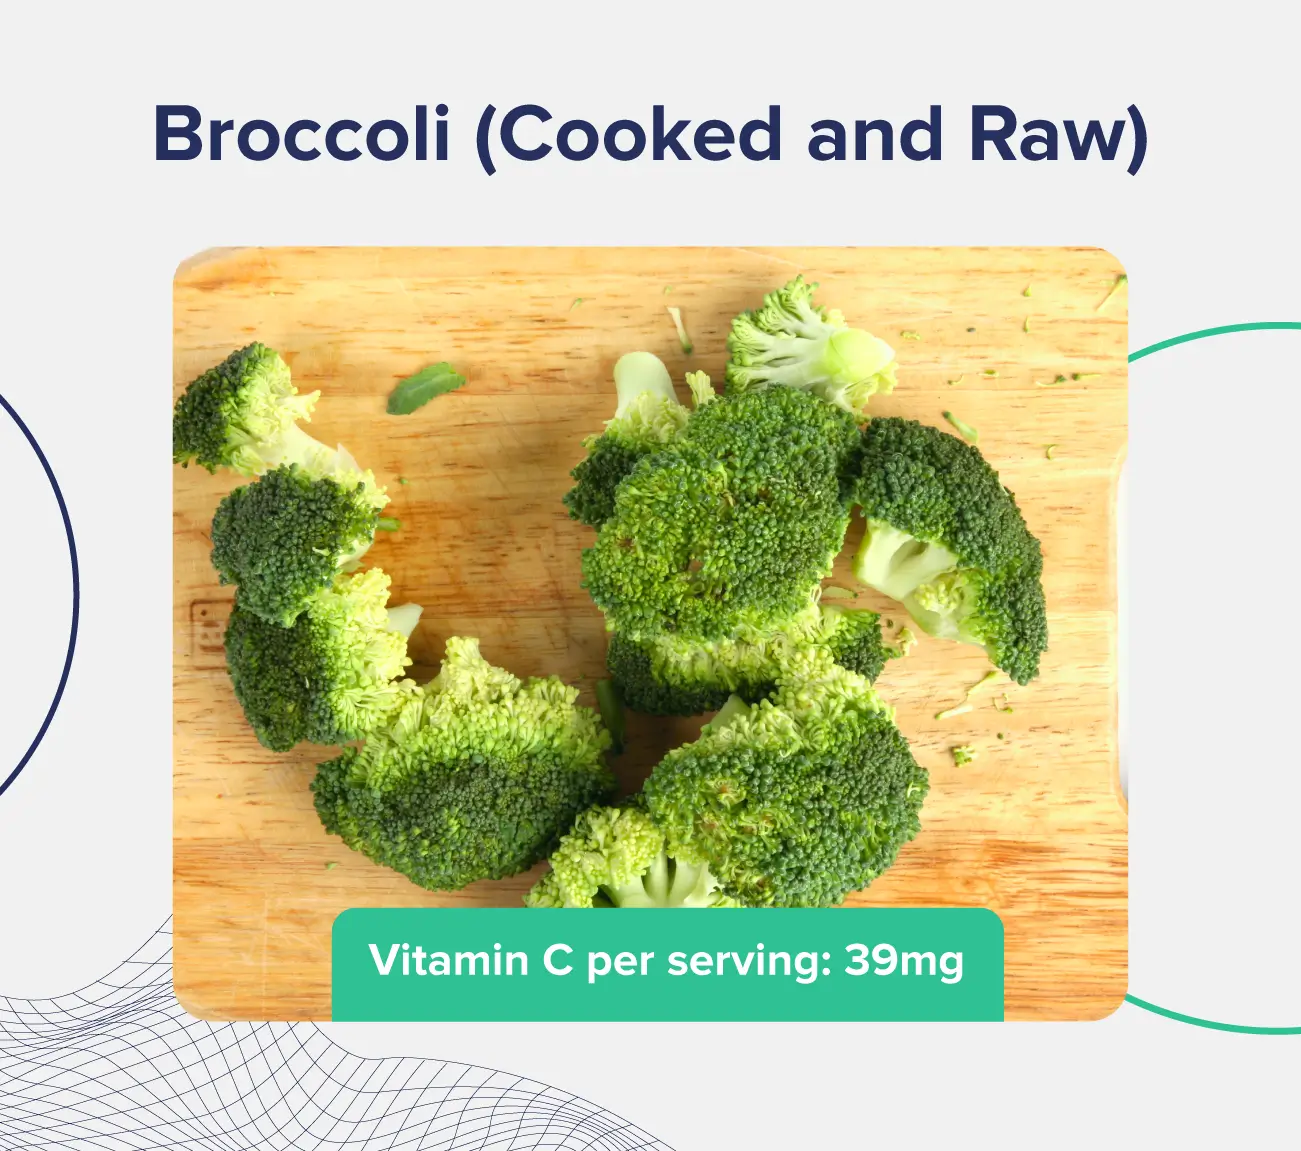 A graphic entitled "Broccoli (cooked and raw)" depicting several chopped florets of broccoli on a cutting board and listing the vitamin C content (39 milligrams per serving)